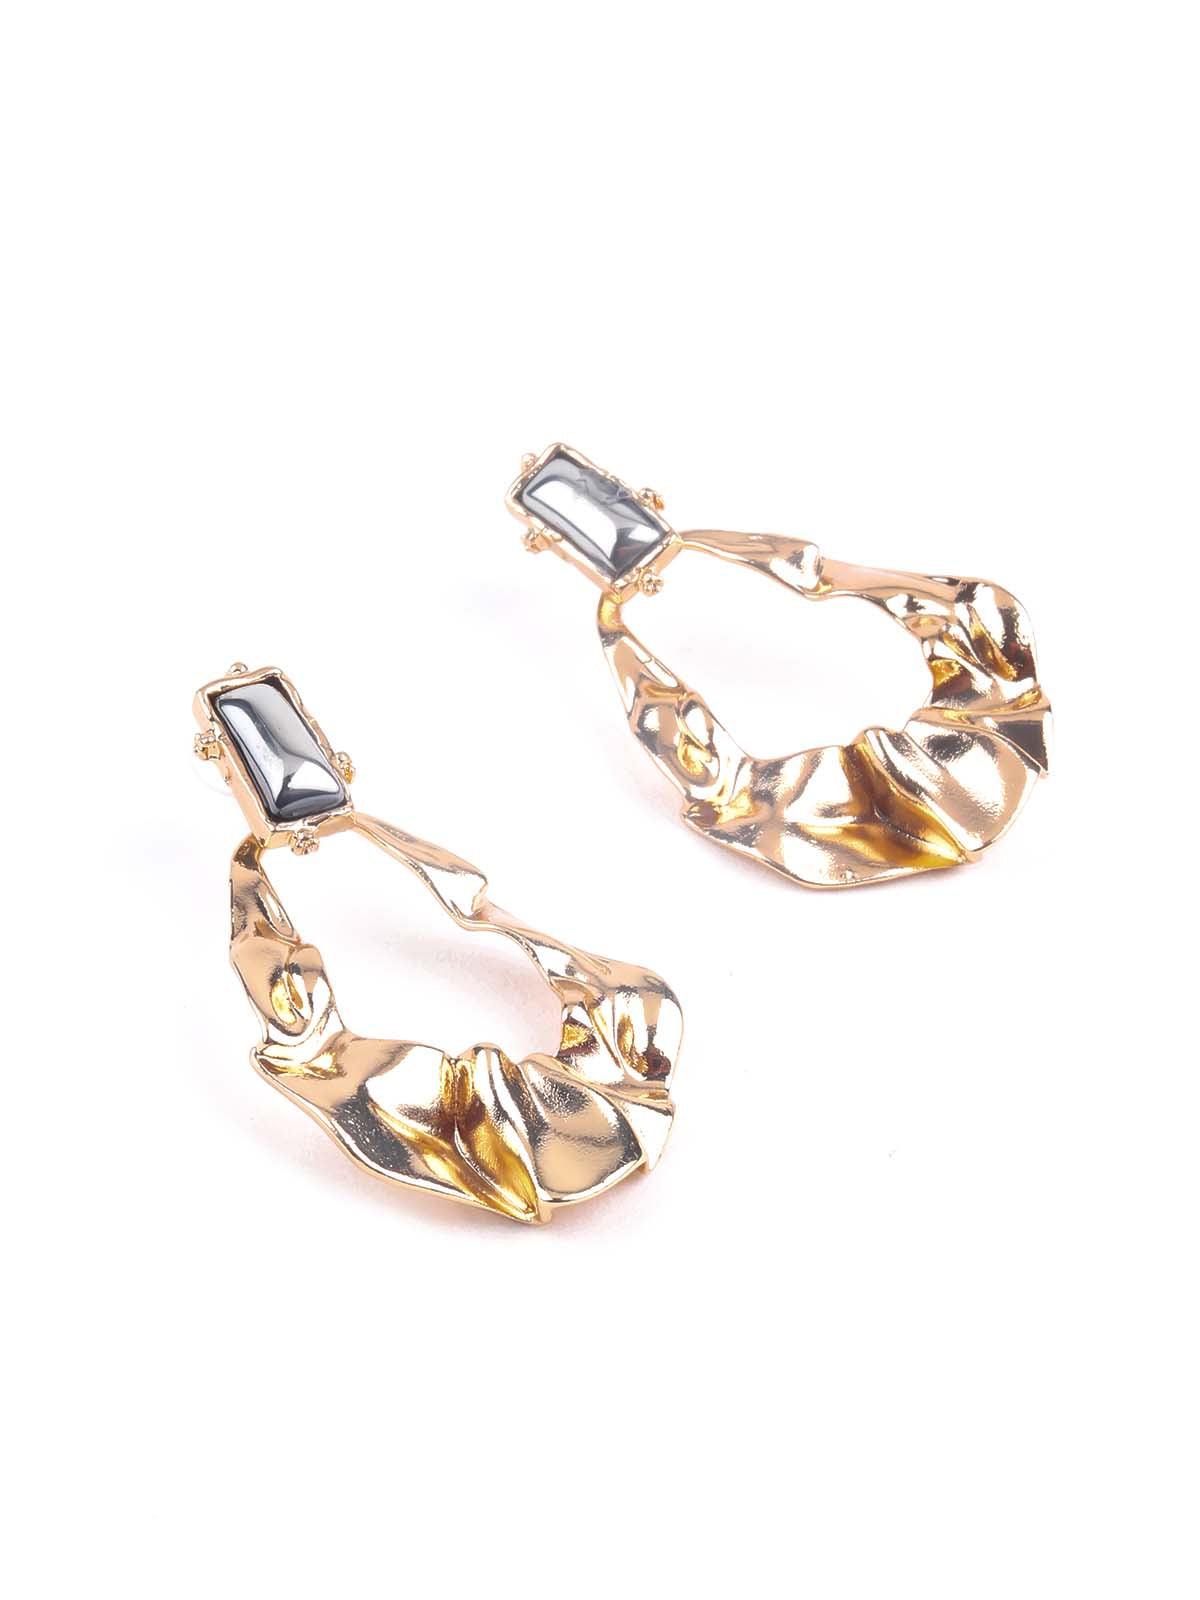 Exquisite Gold textured drop earrings - Odette